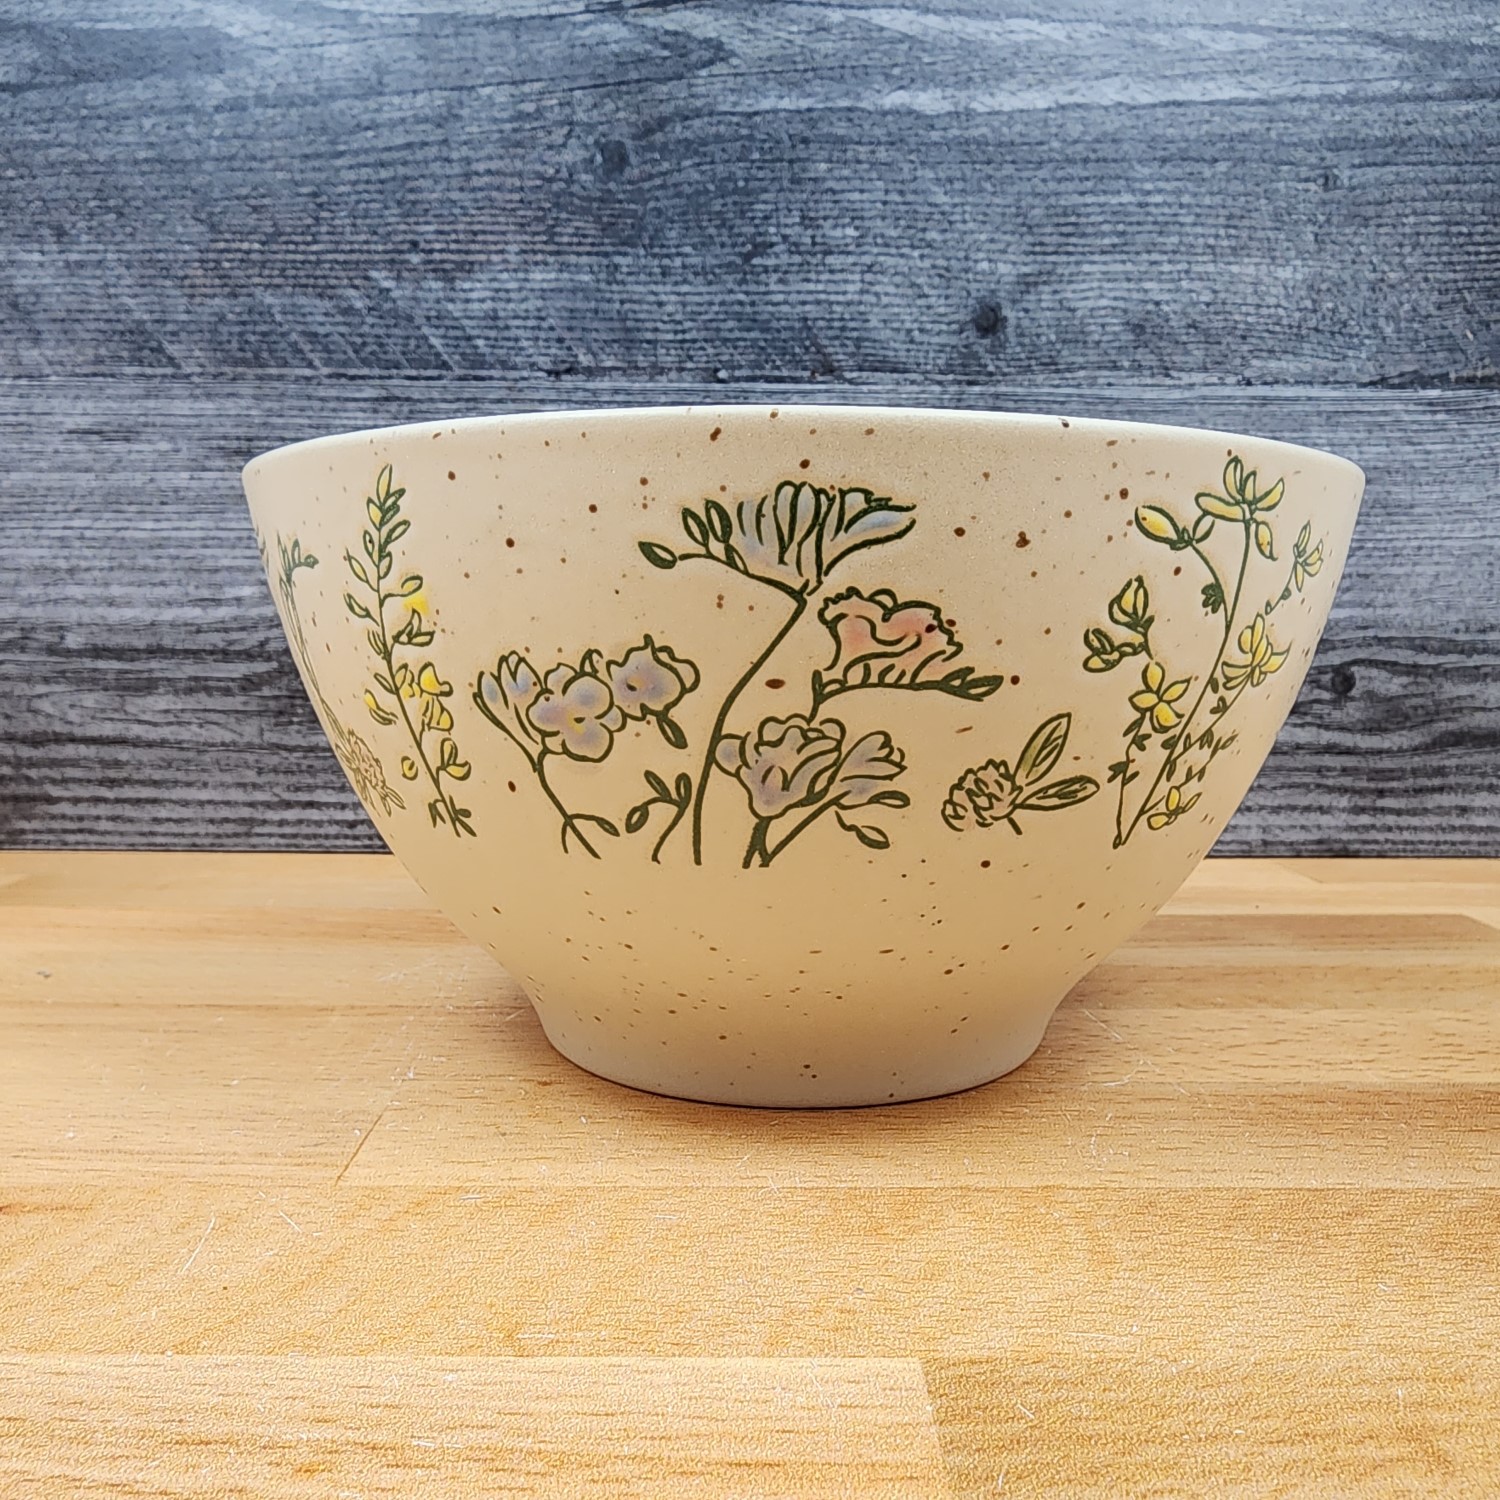 This Spring Flowers Festive Bowl 6 inch (15cm) Floral Dish by Blue Sky is made with love by Premier Homegoods! Shop more unique gift ideas today with Spots Initiatives, the best way to support creators.